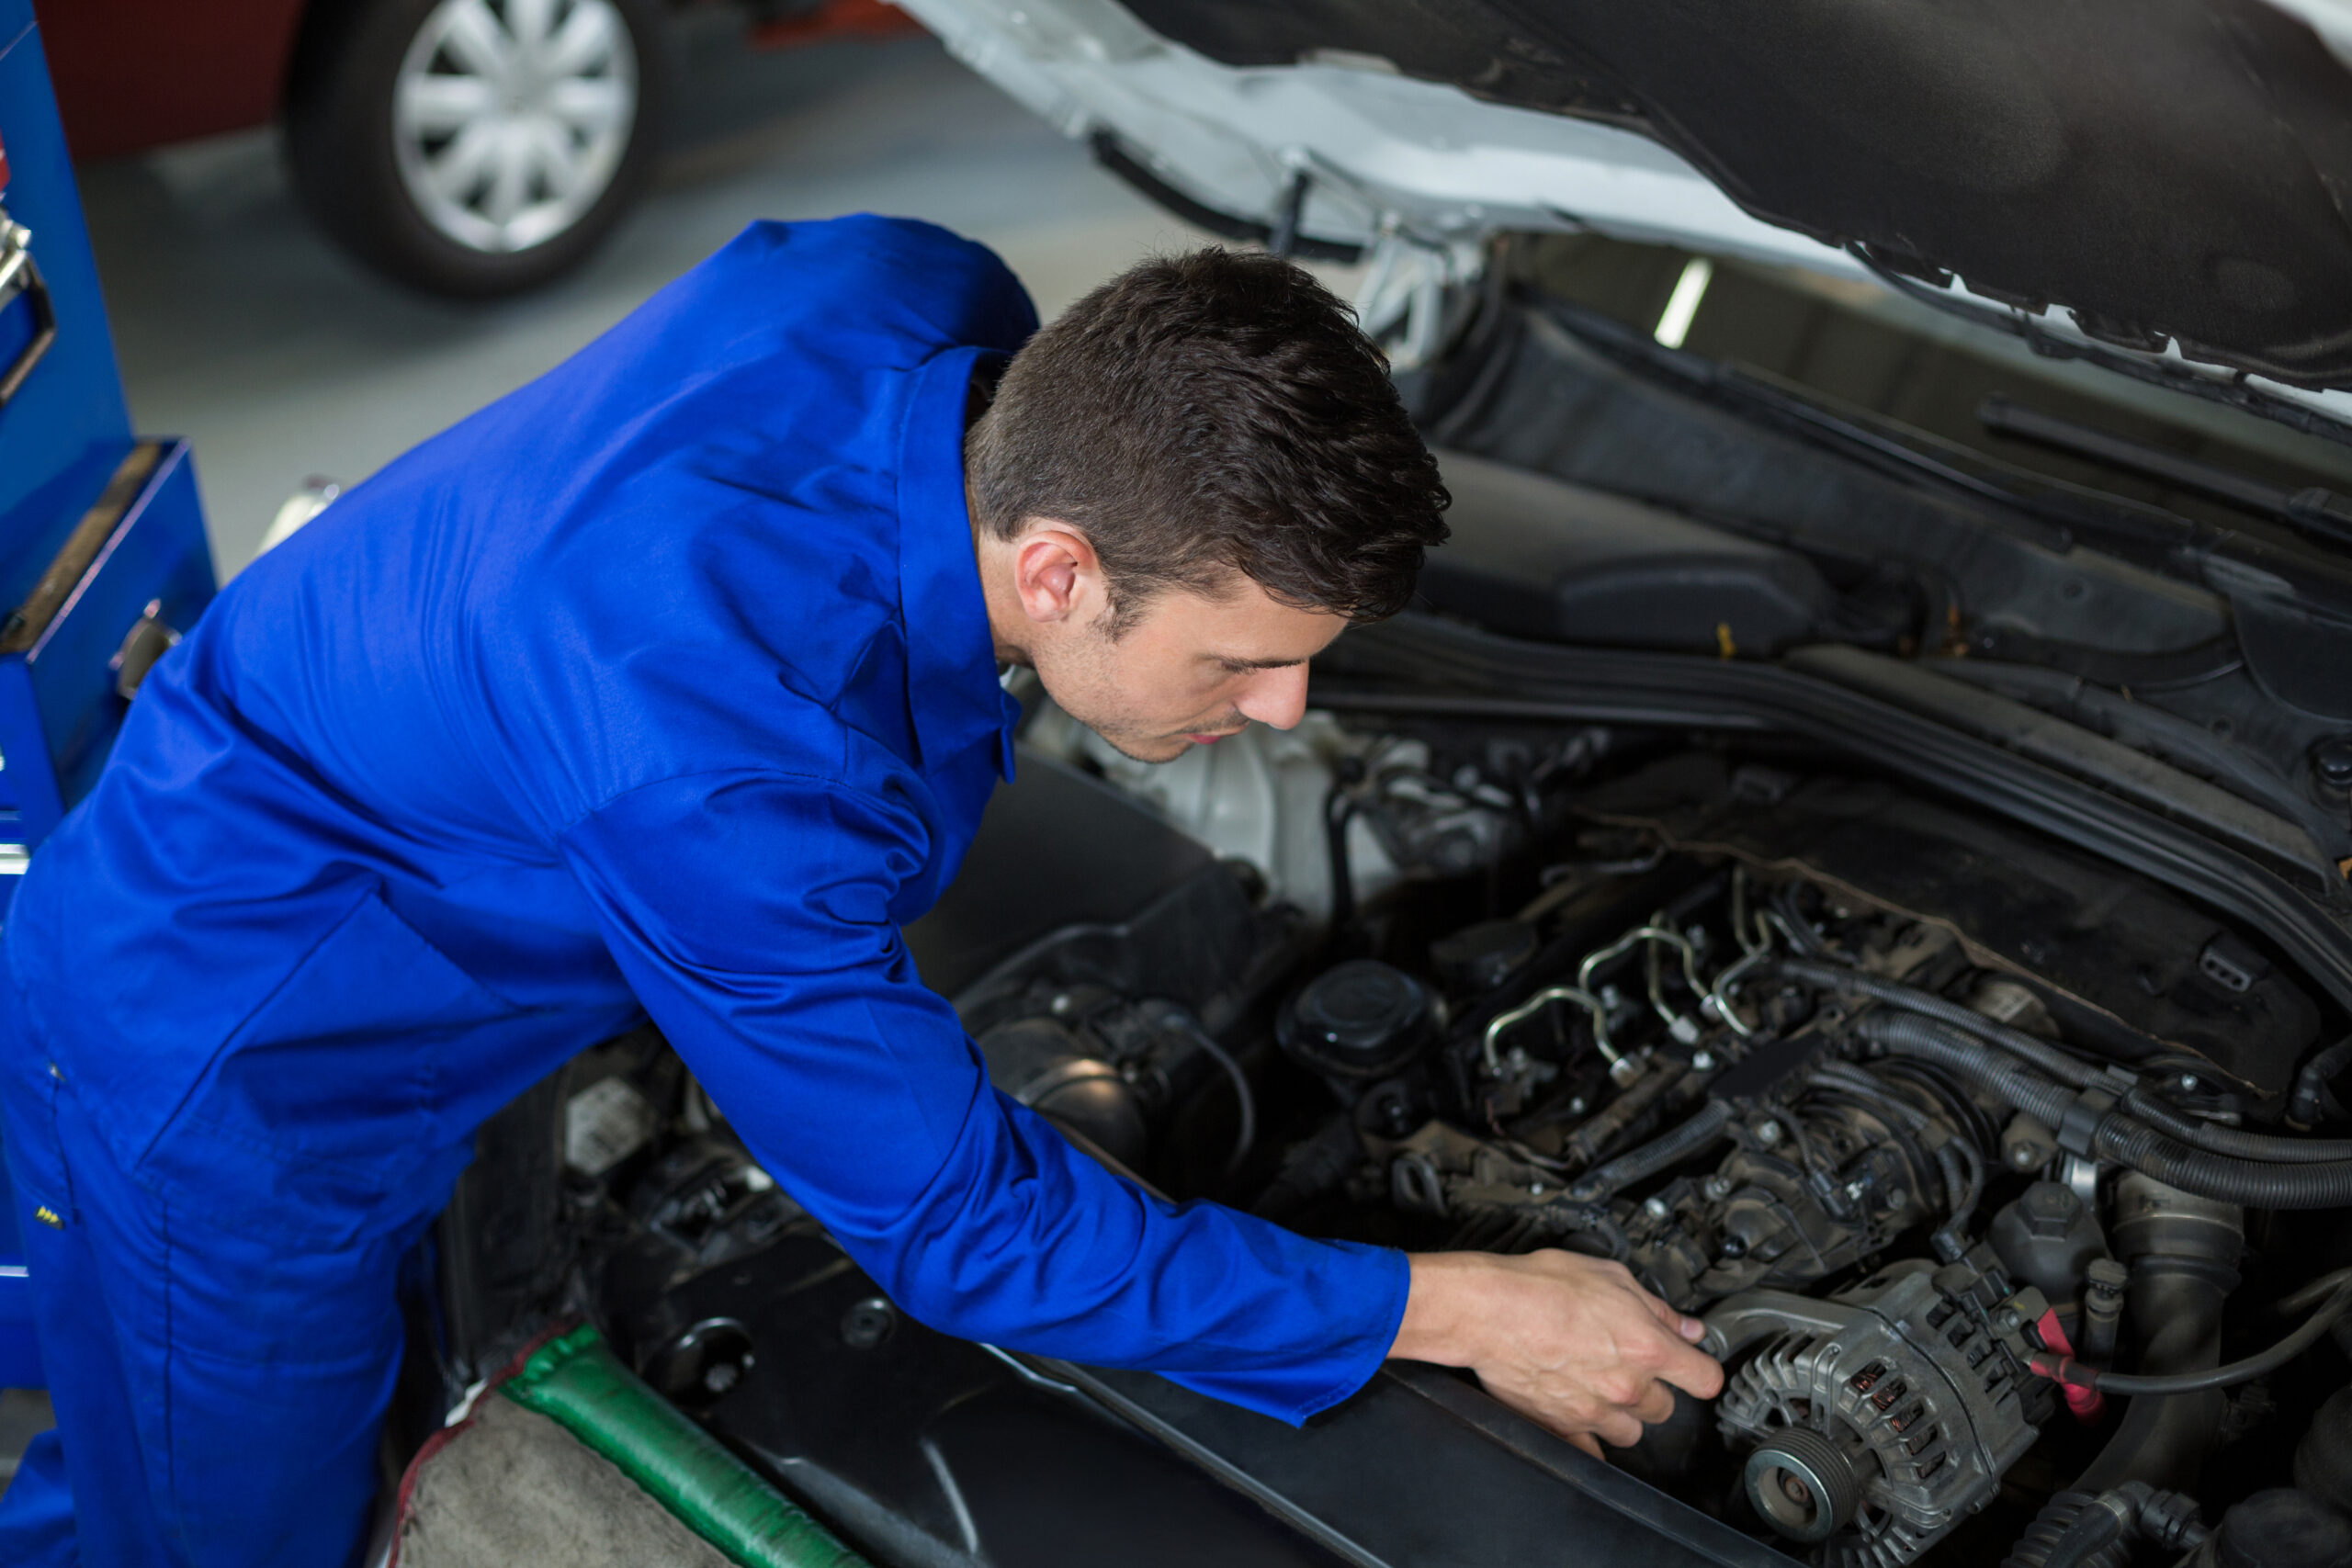 Peugeot Engine replacement in Dubai (Service My Car)